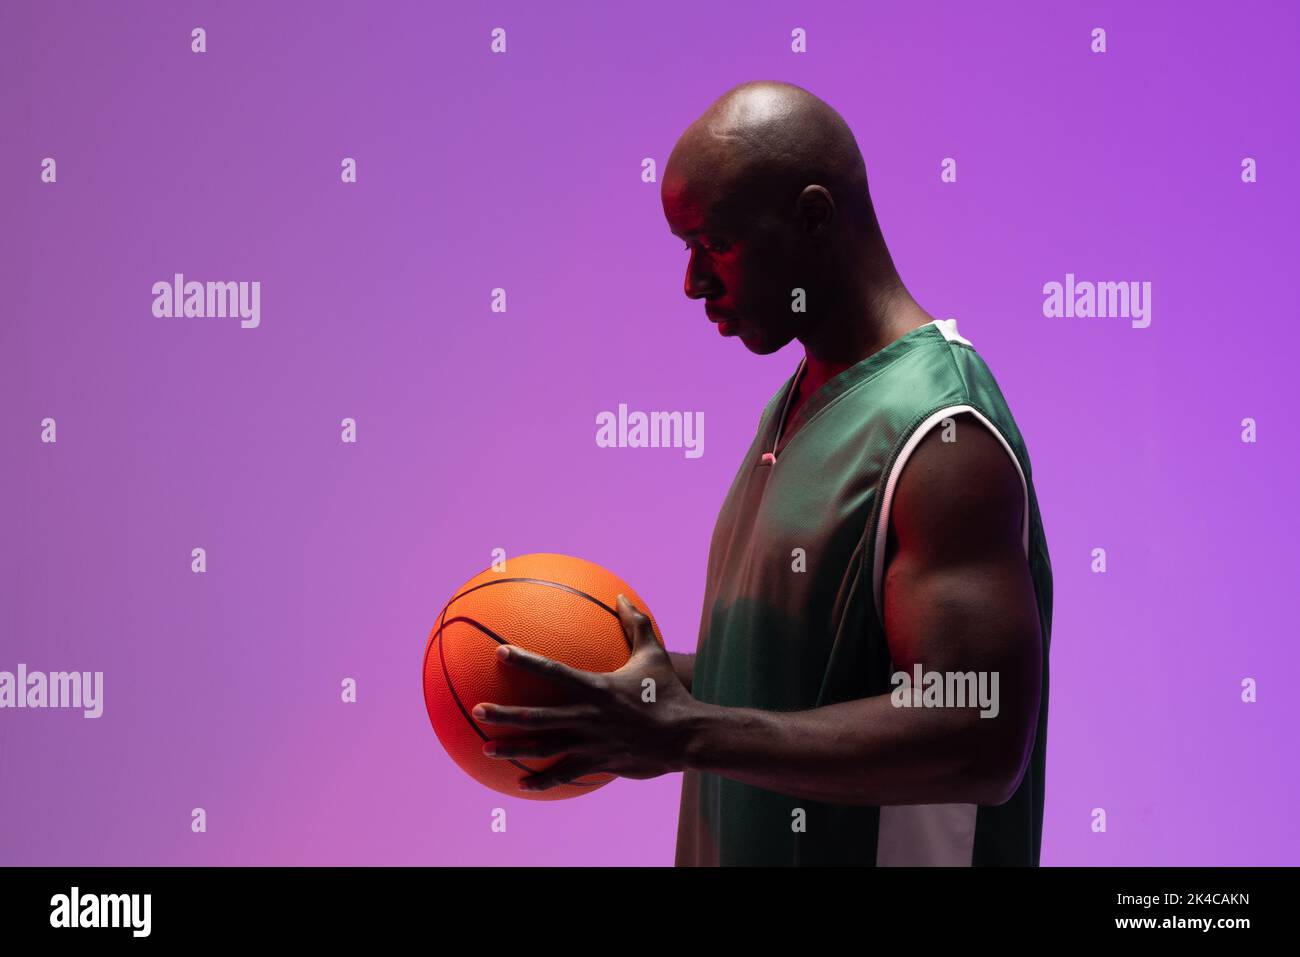 Image of african american basketball player with basketball on neon purple background. Sports and competition concept. Stock Photo